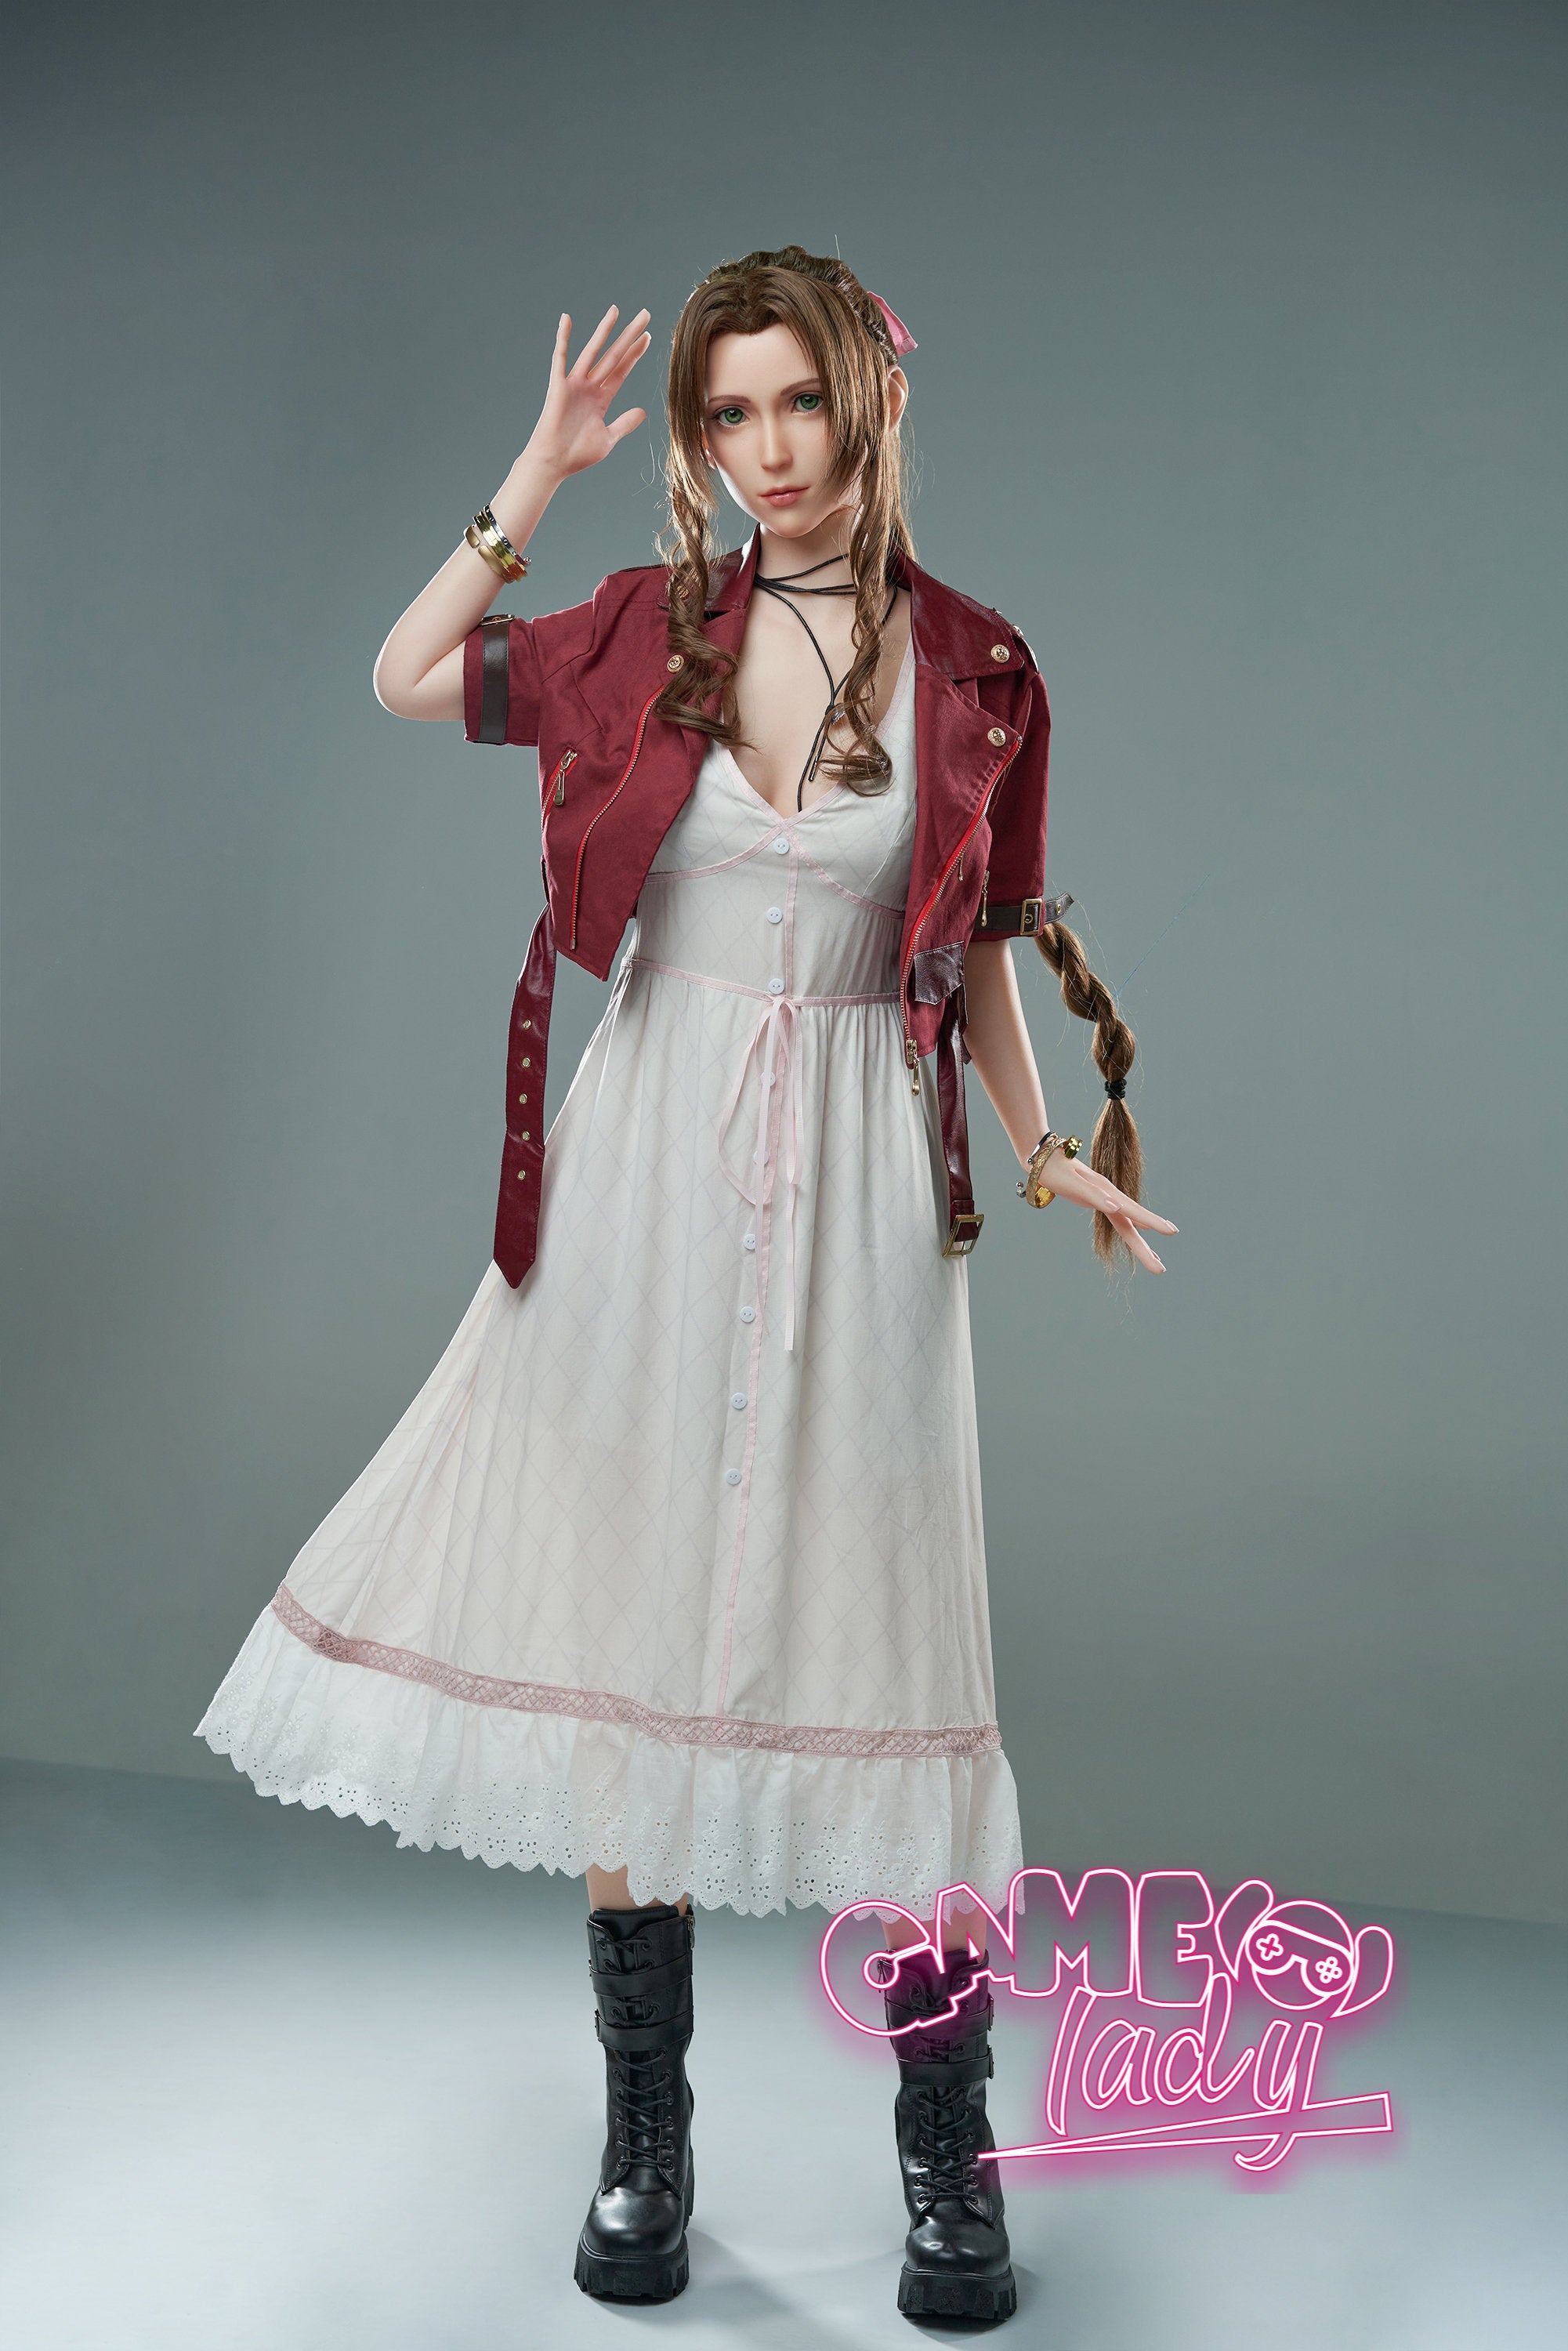 Game Lady 167 cm Silicone - Aerith | Buy Sex Dolls at DOLLS ACTUALLY